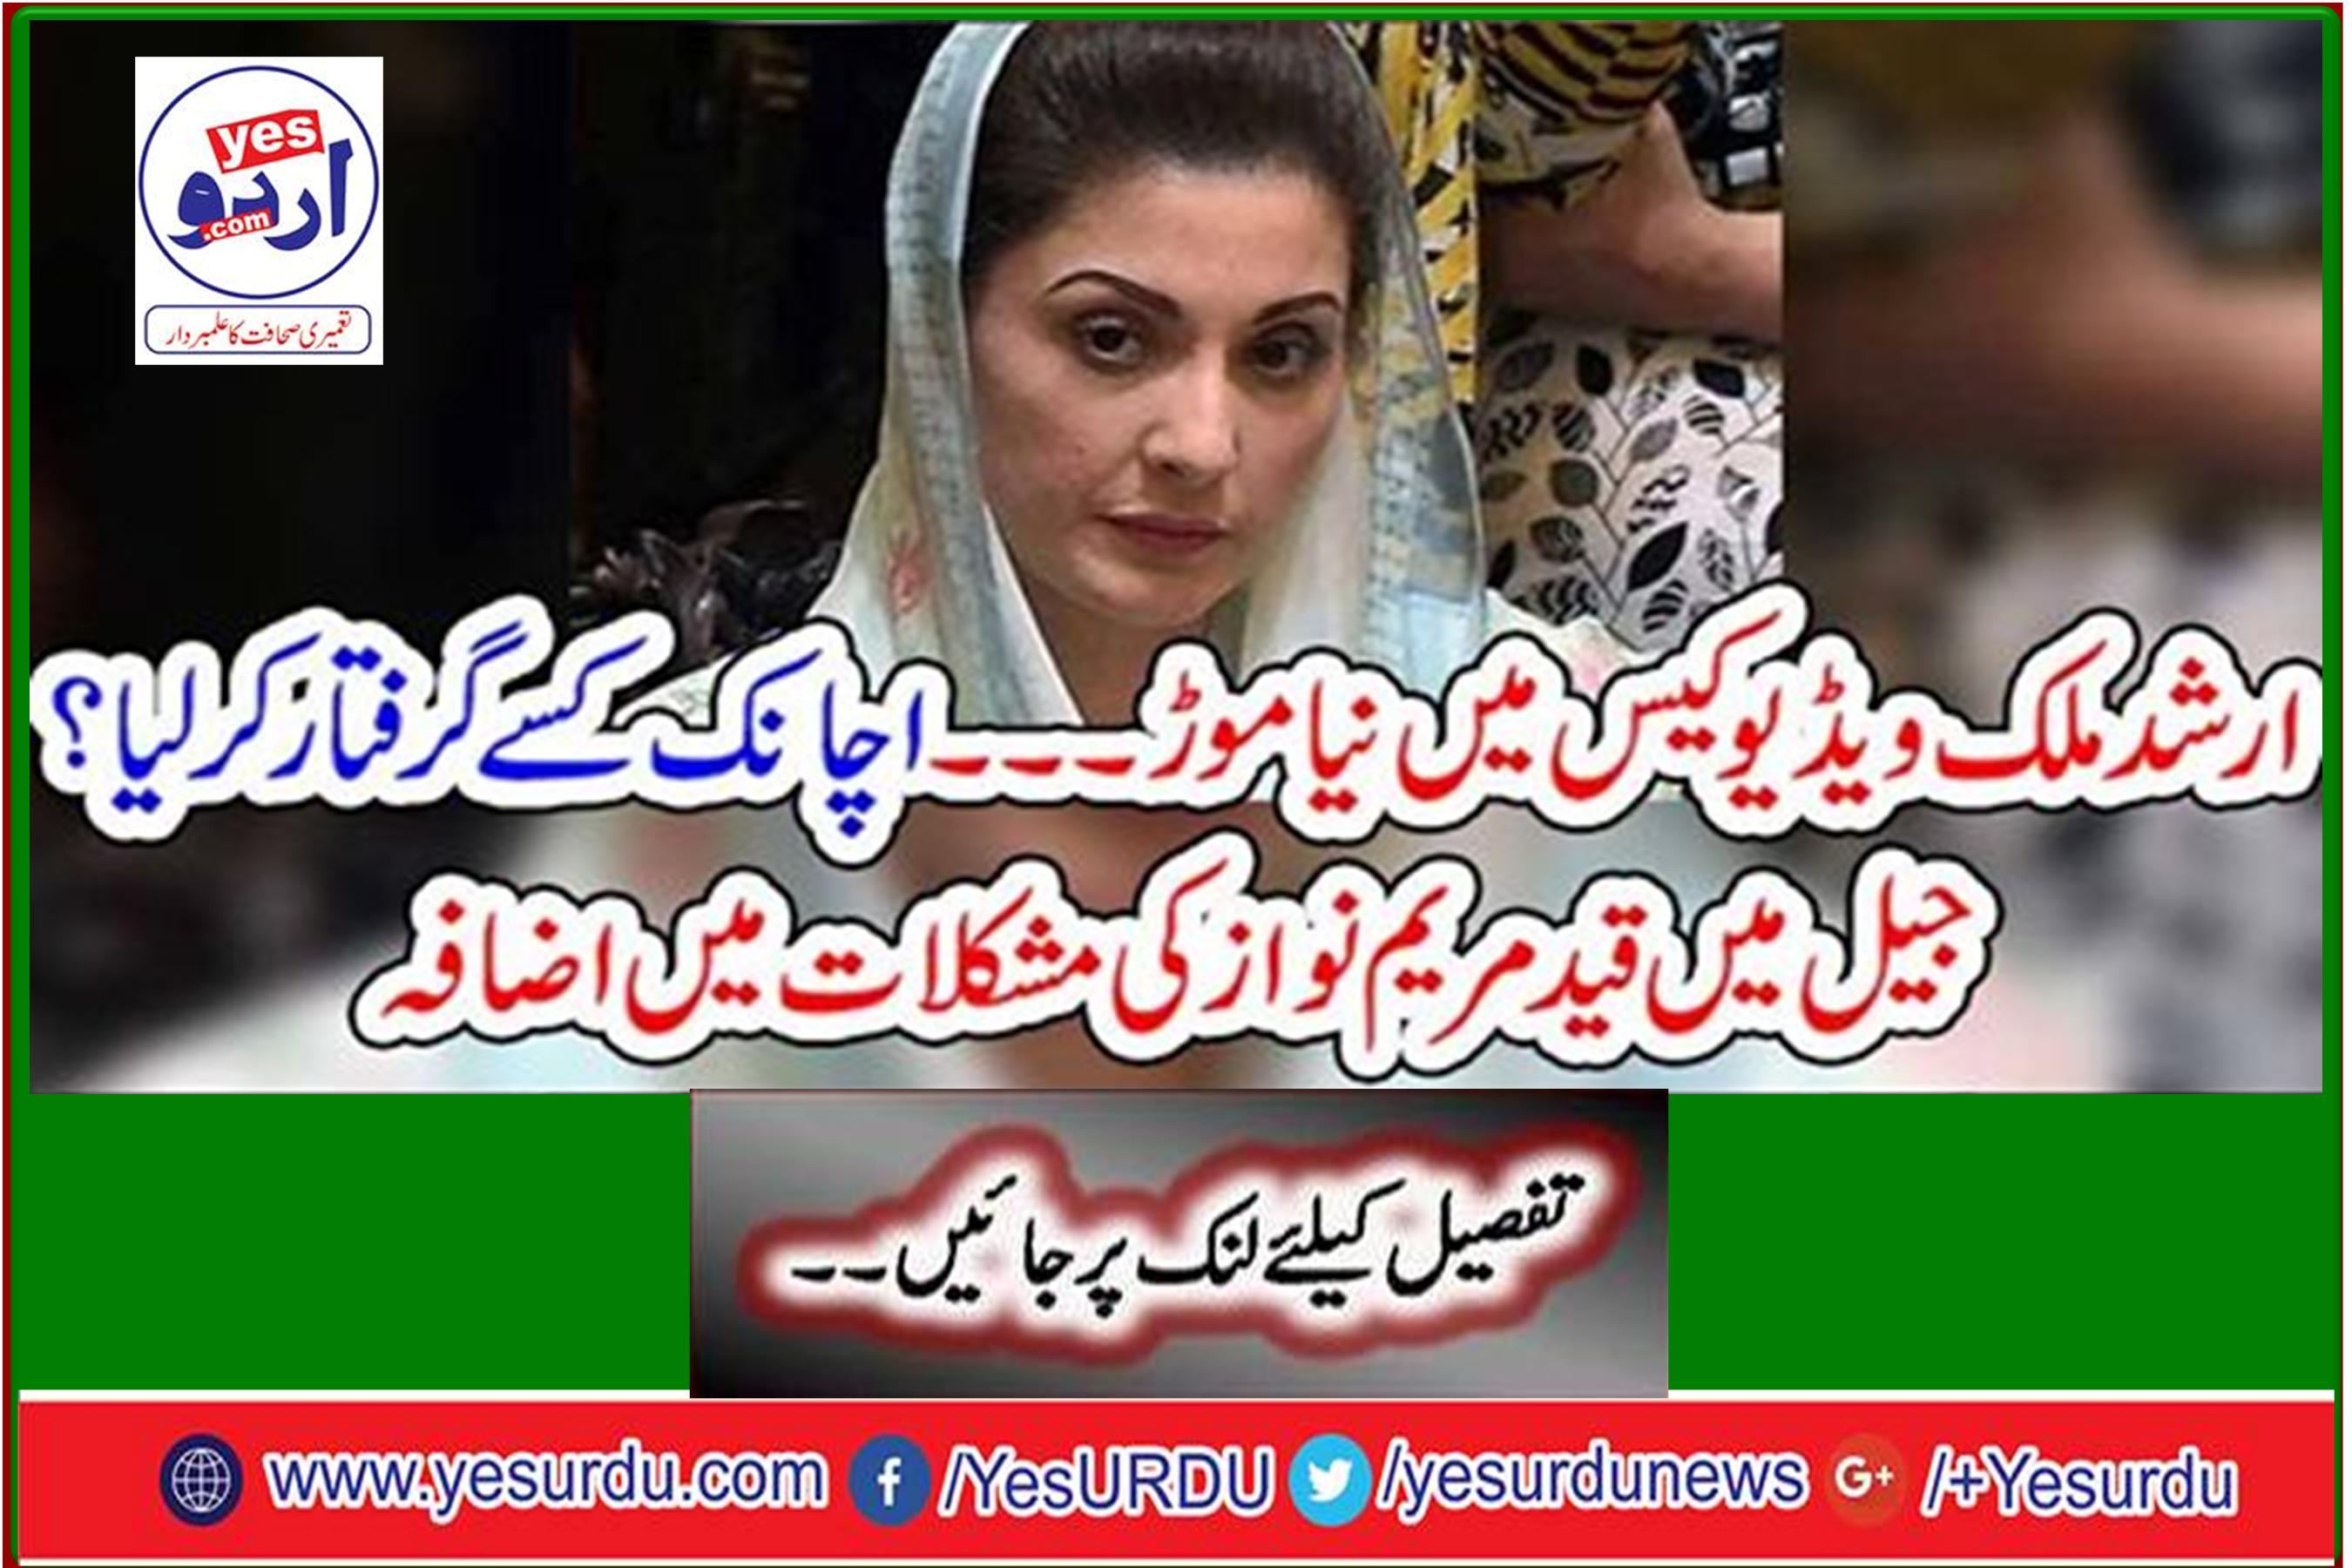 New twist in Arshad Malik video case - Who arrested someone suddenly? Maryam Nawaz's confinement in prison escalates